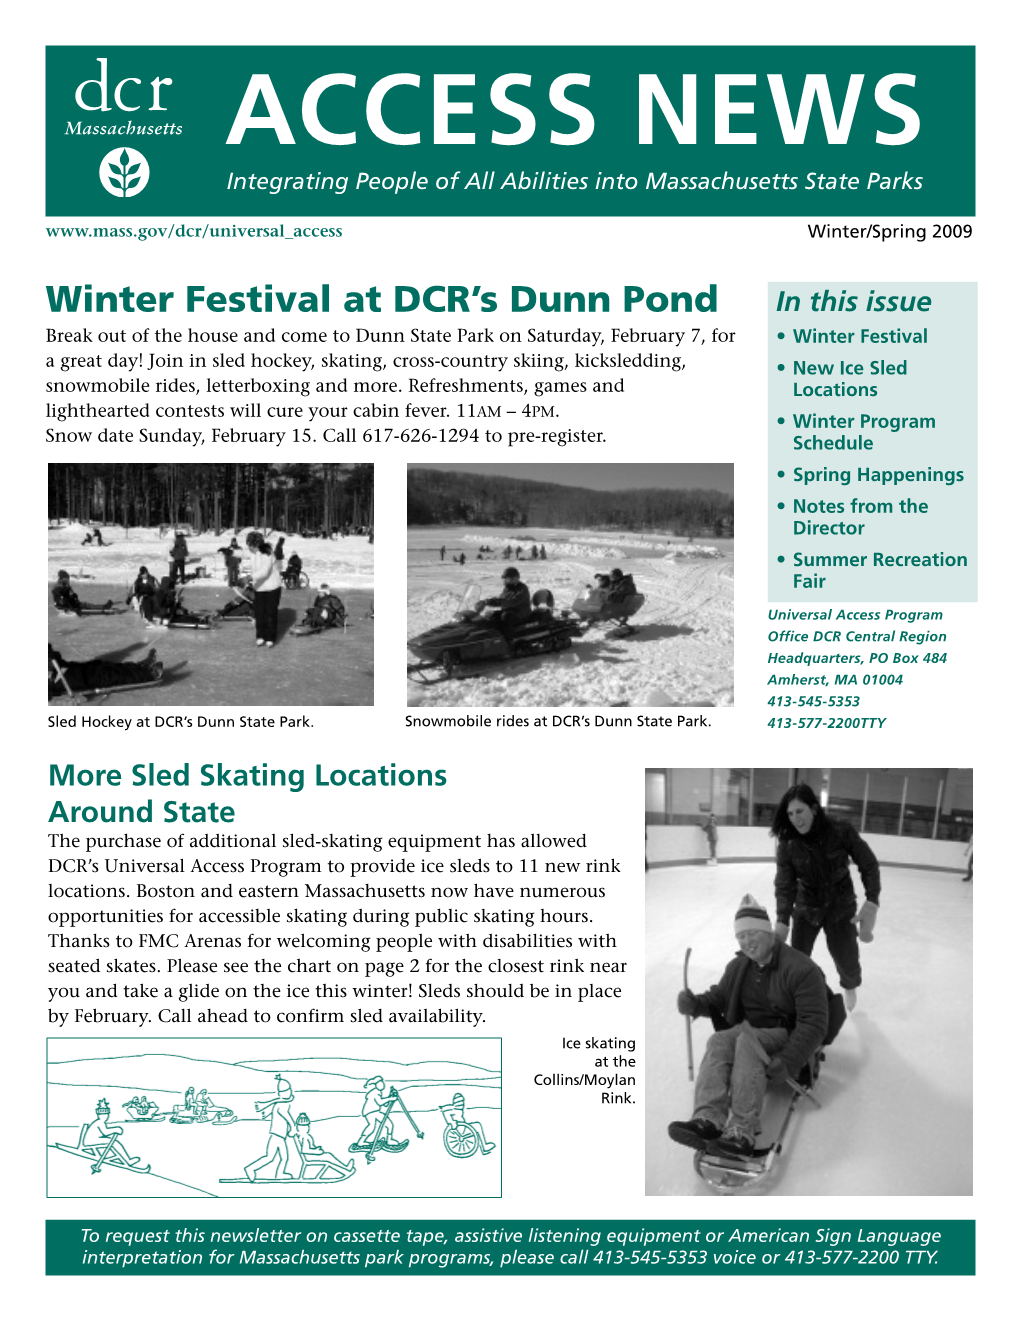 ACCESS NEWS Integrating People of All Abilities Into Massachusetts State Parks Winter/Spring 2009